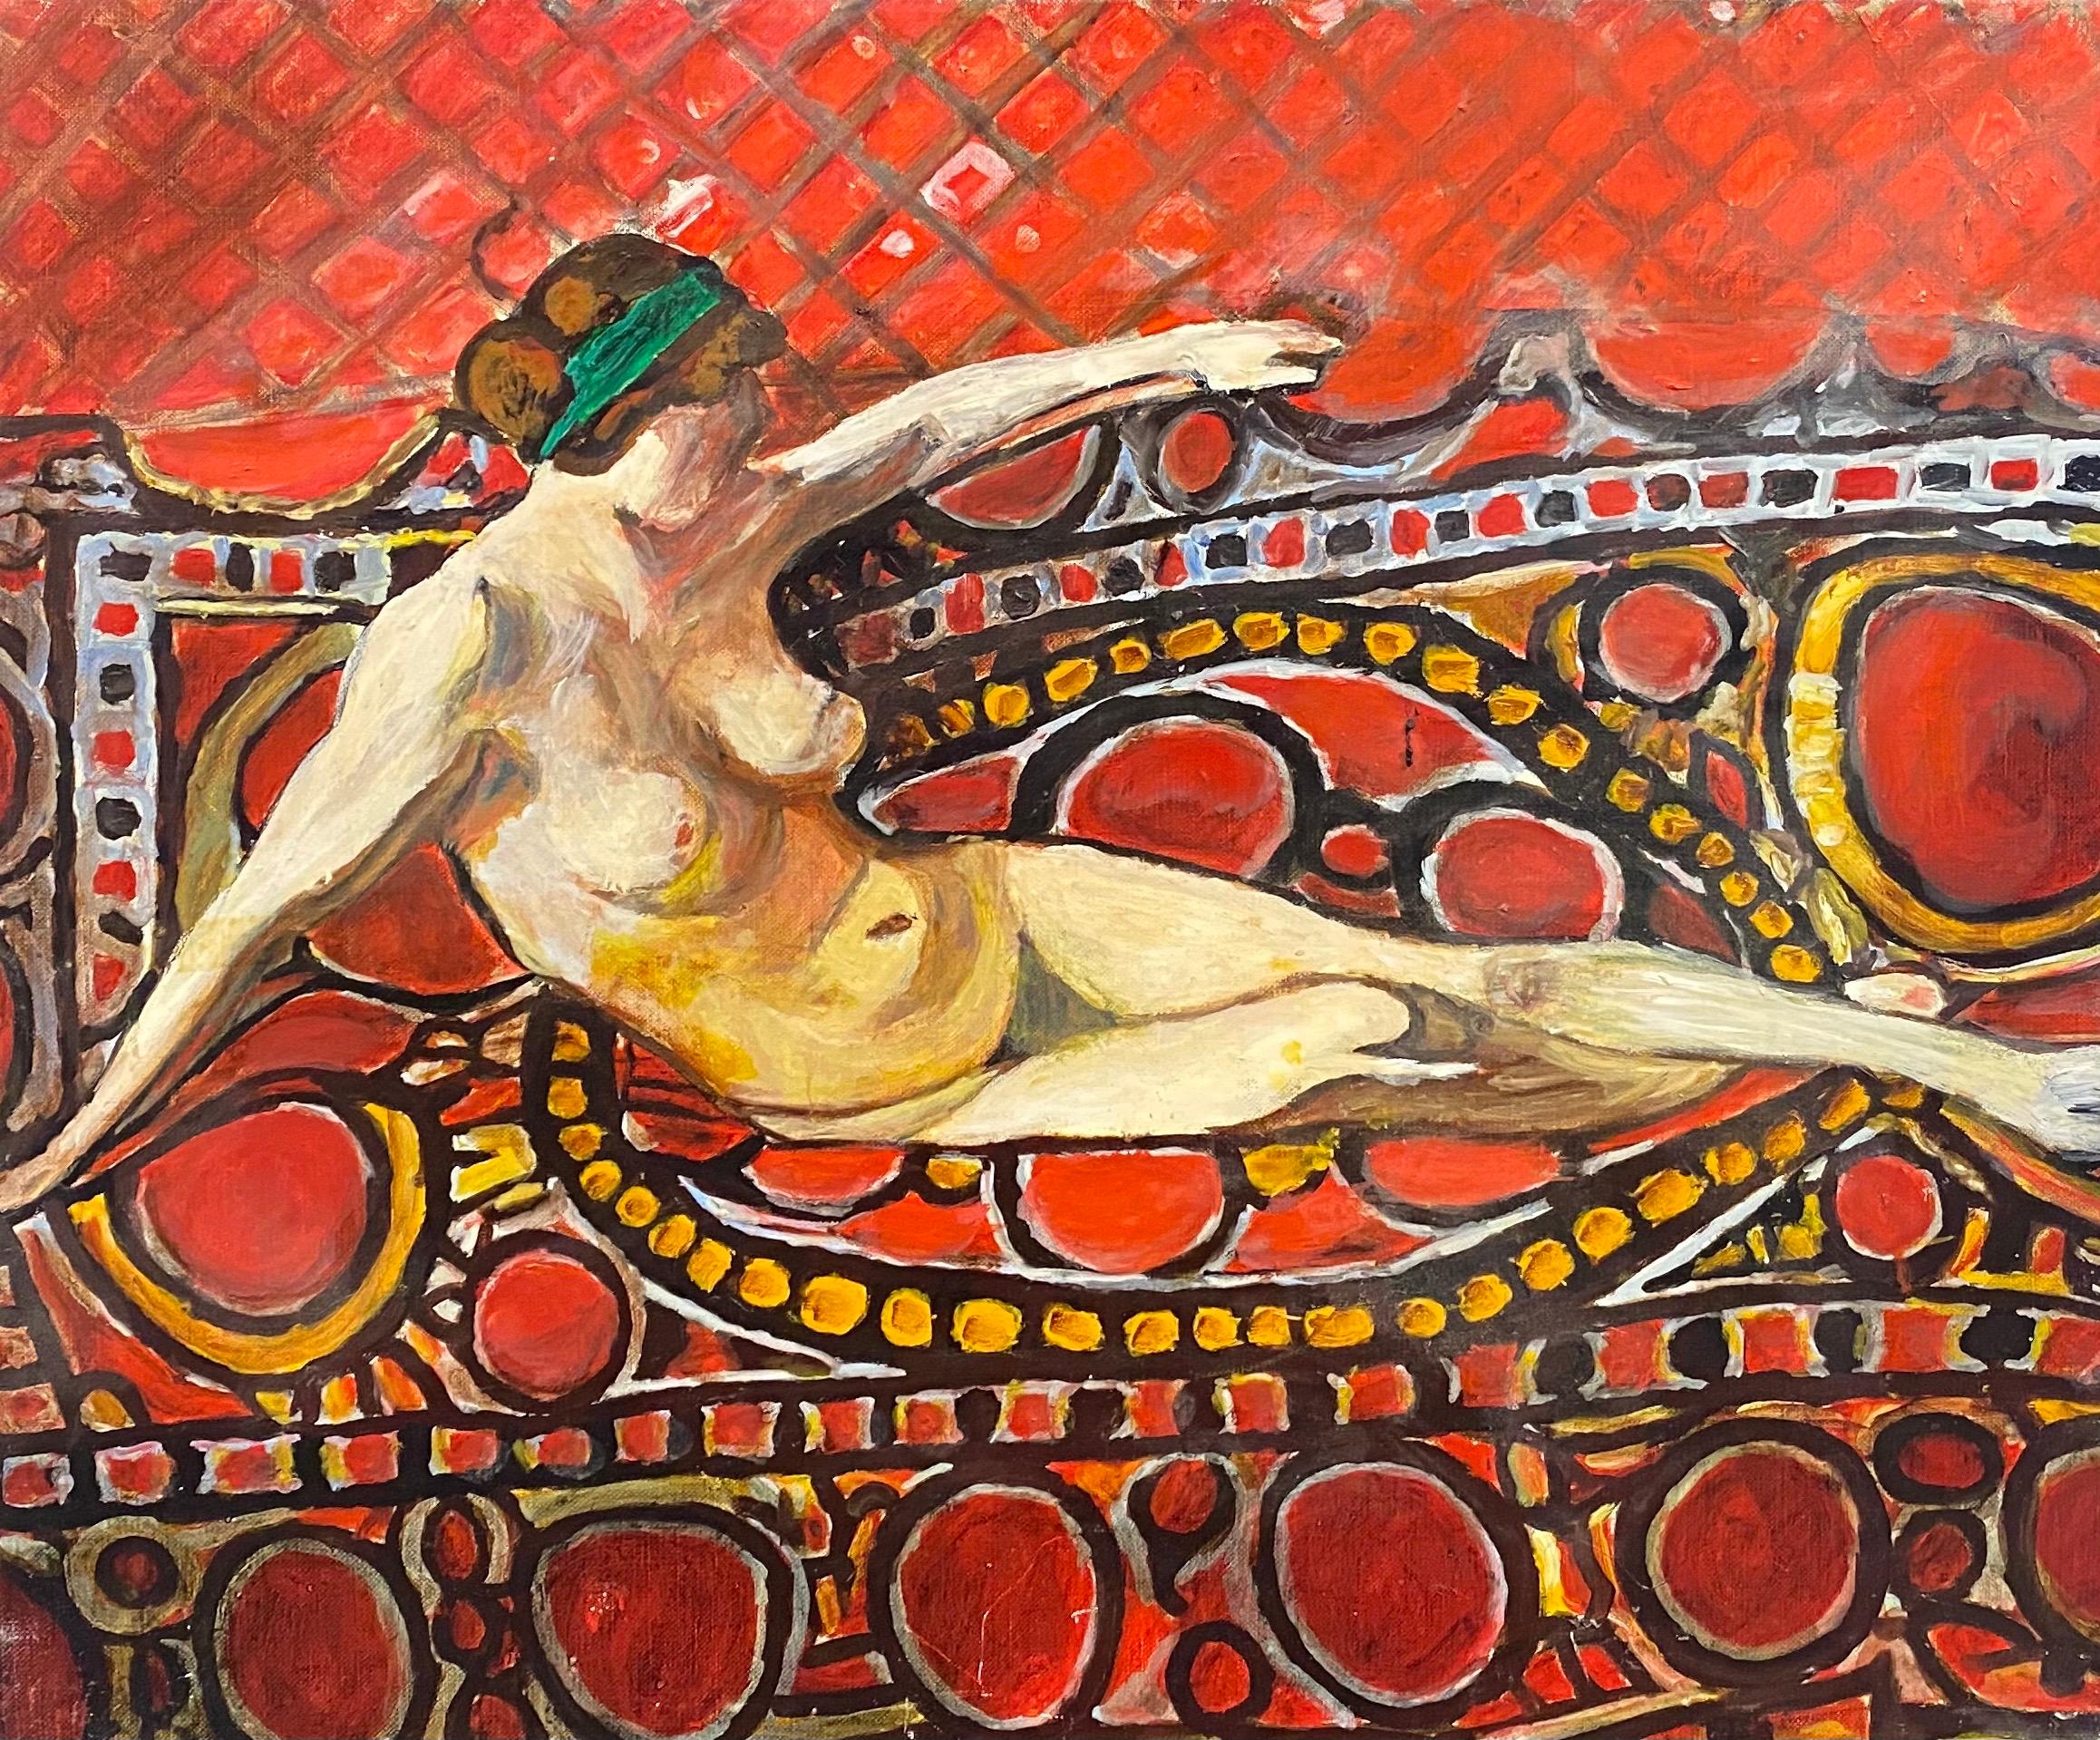 Large French Colorist Modernist Oil Reclining Nude on Red Sofa. 1970's Oil